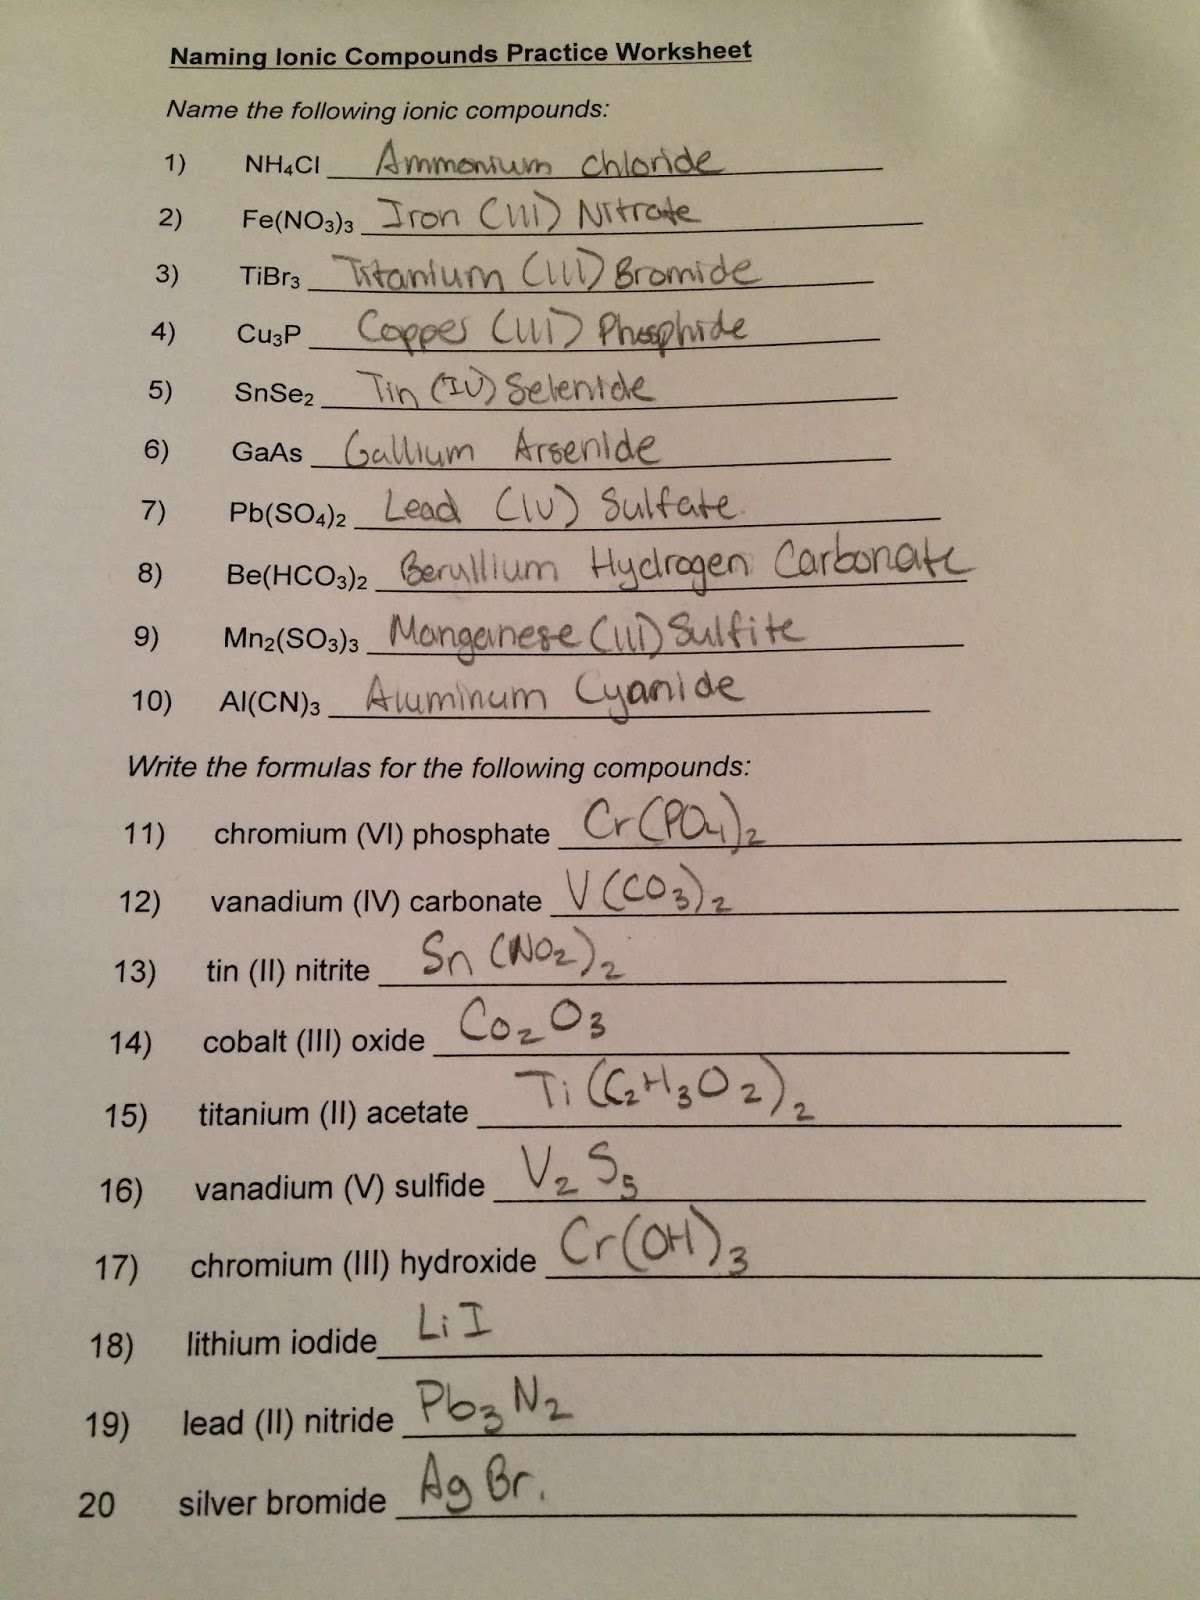 all-ionic-compounds-worksheets-answers-db-excel